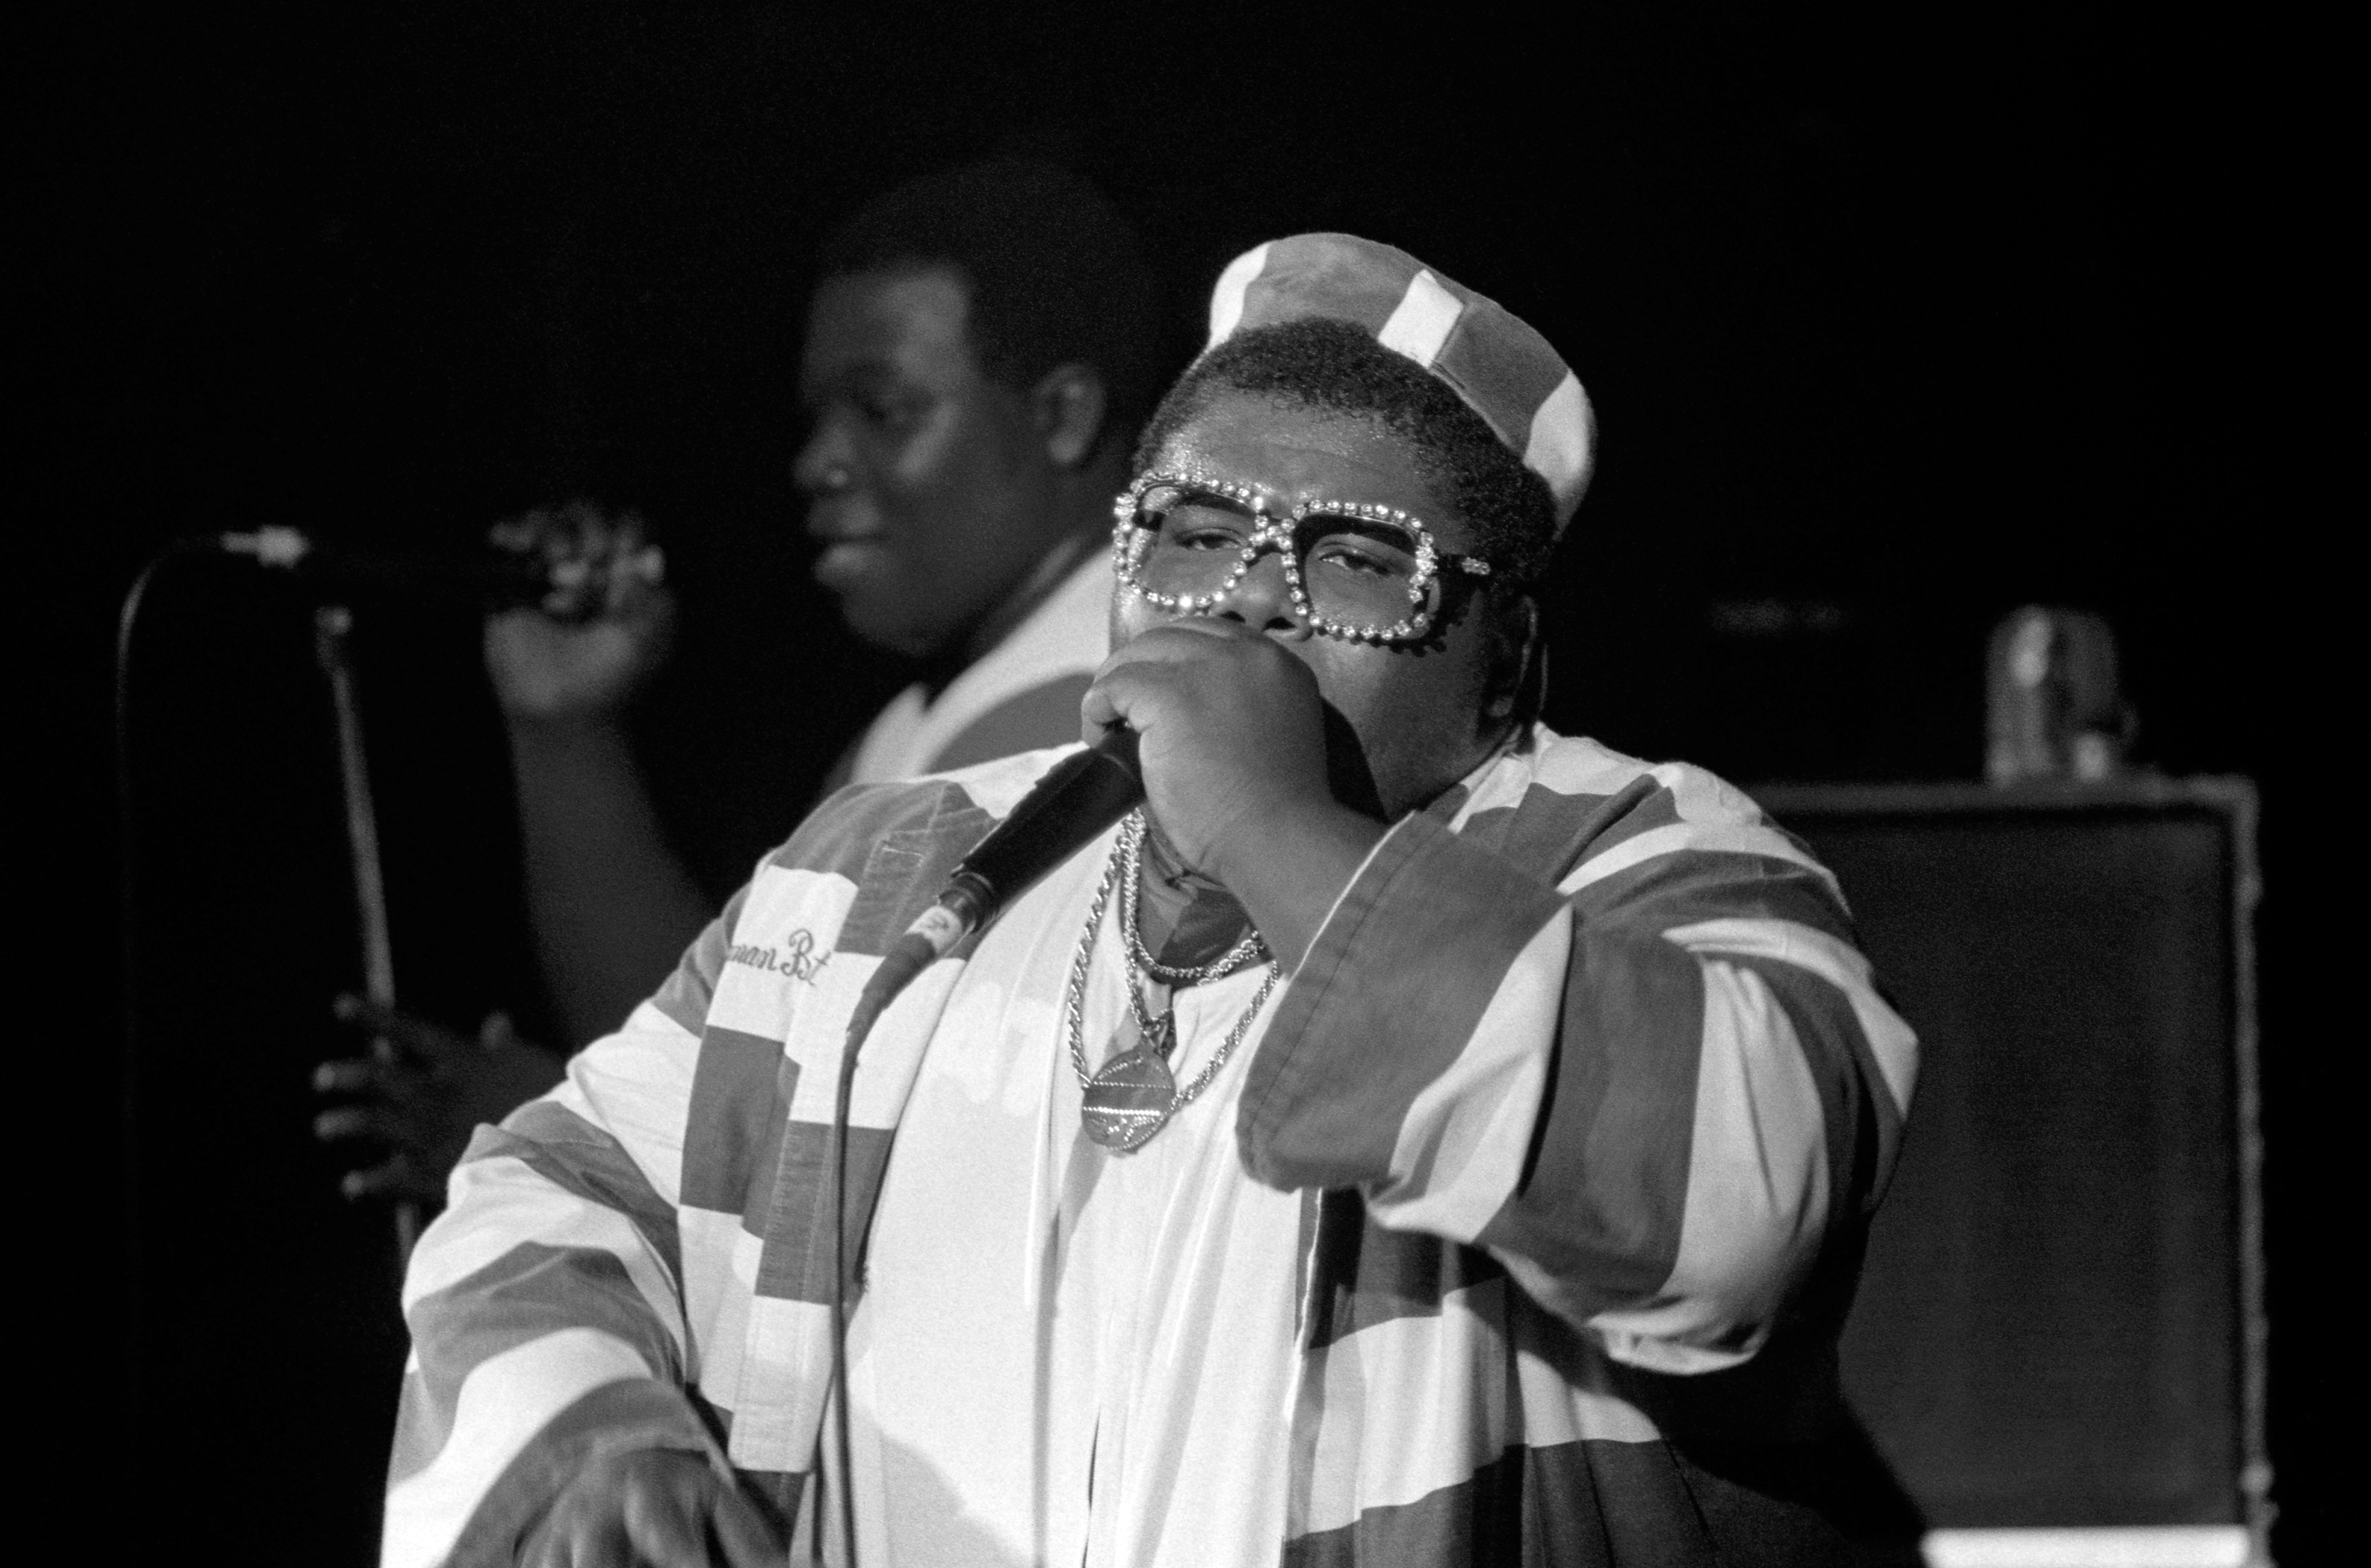 American rapper, beatboxer, and actor Darren "Buff Love" Robinson (1967 - 1995), of the American hip hop trio The Fat Boys, sings on stage during the 1985 Fresh Fest at the Providence Civic Center in Providence, Rhode Island in August 1985